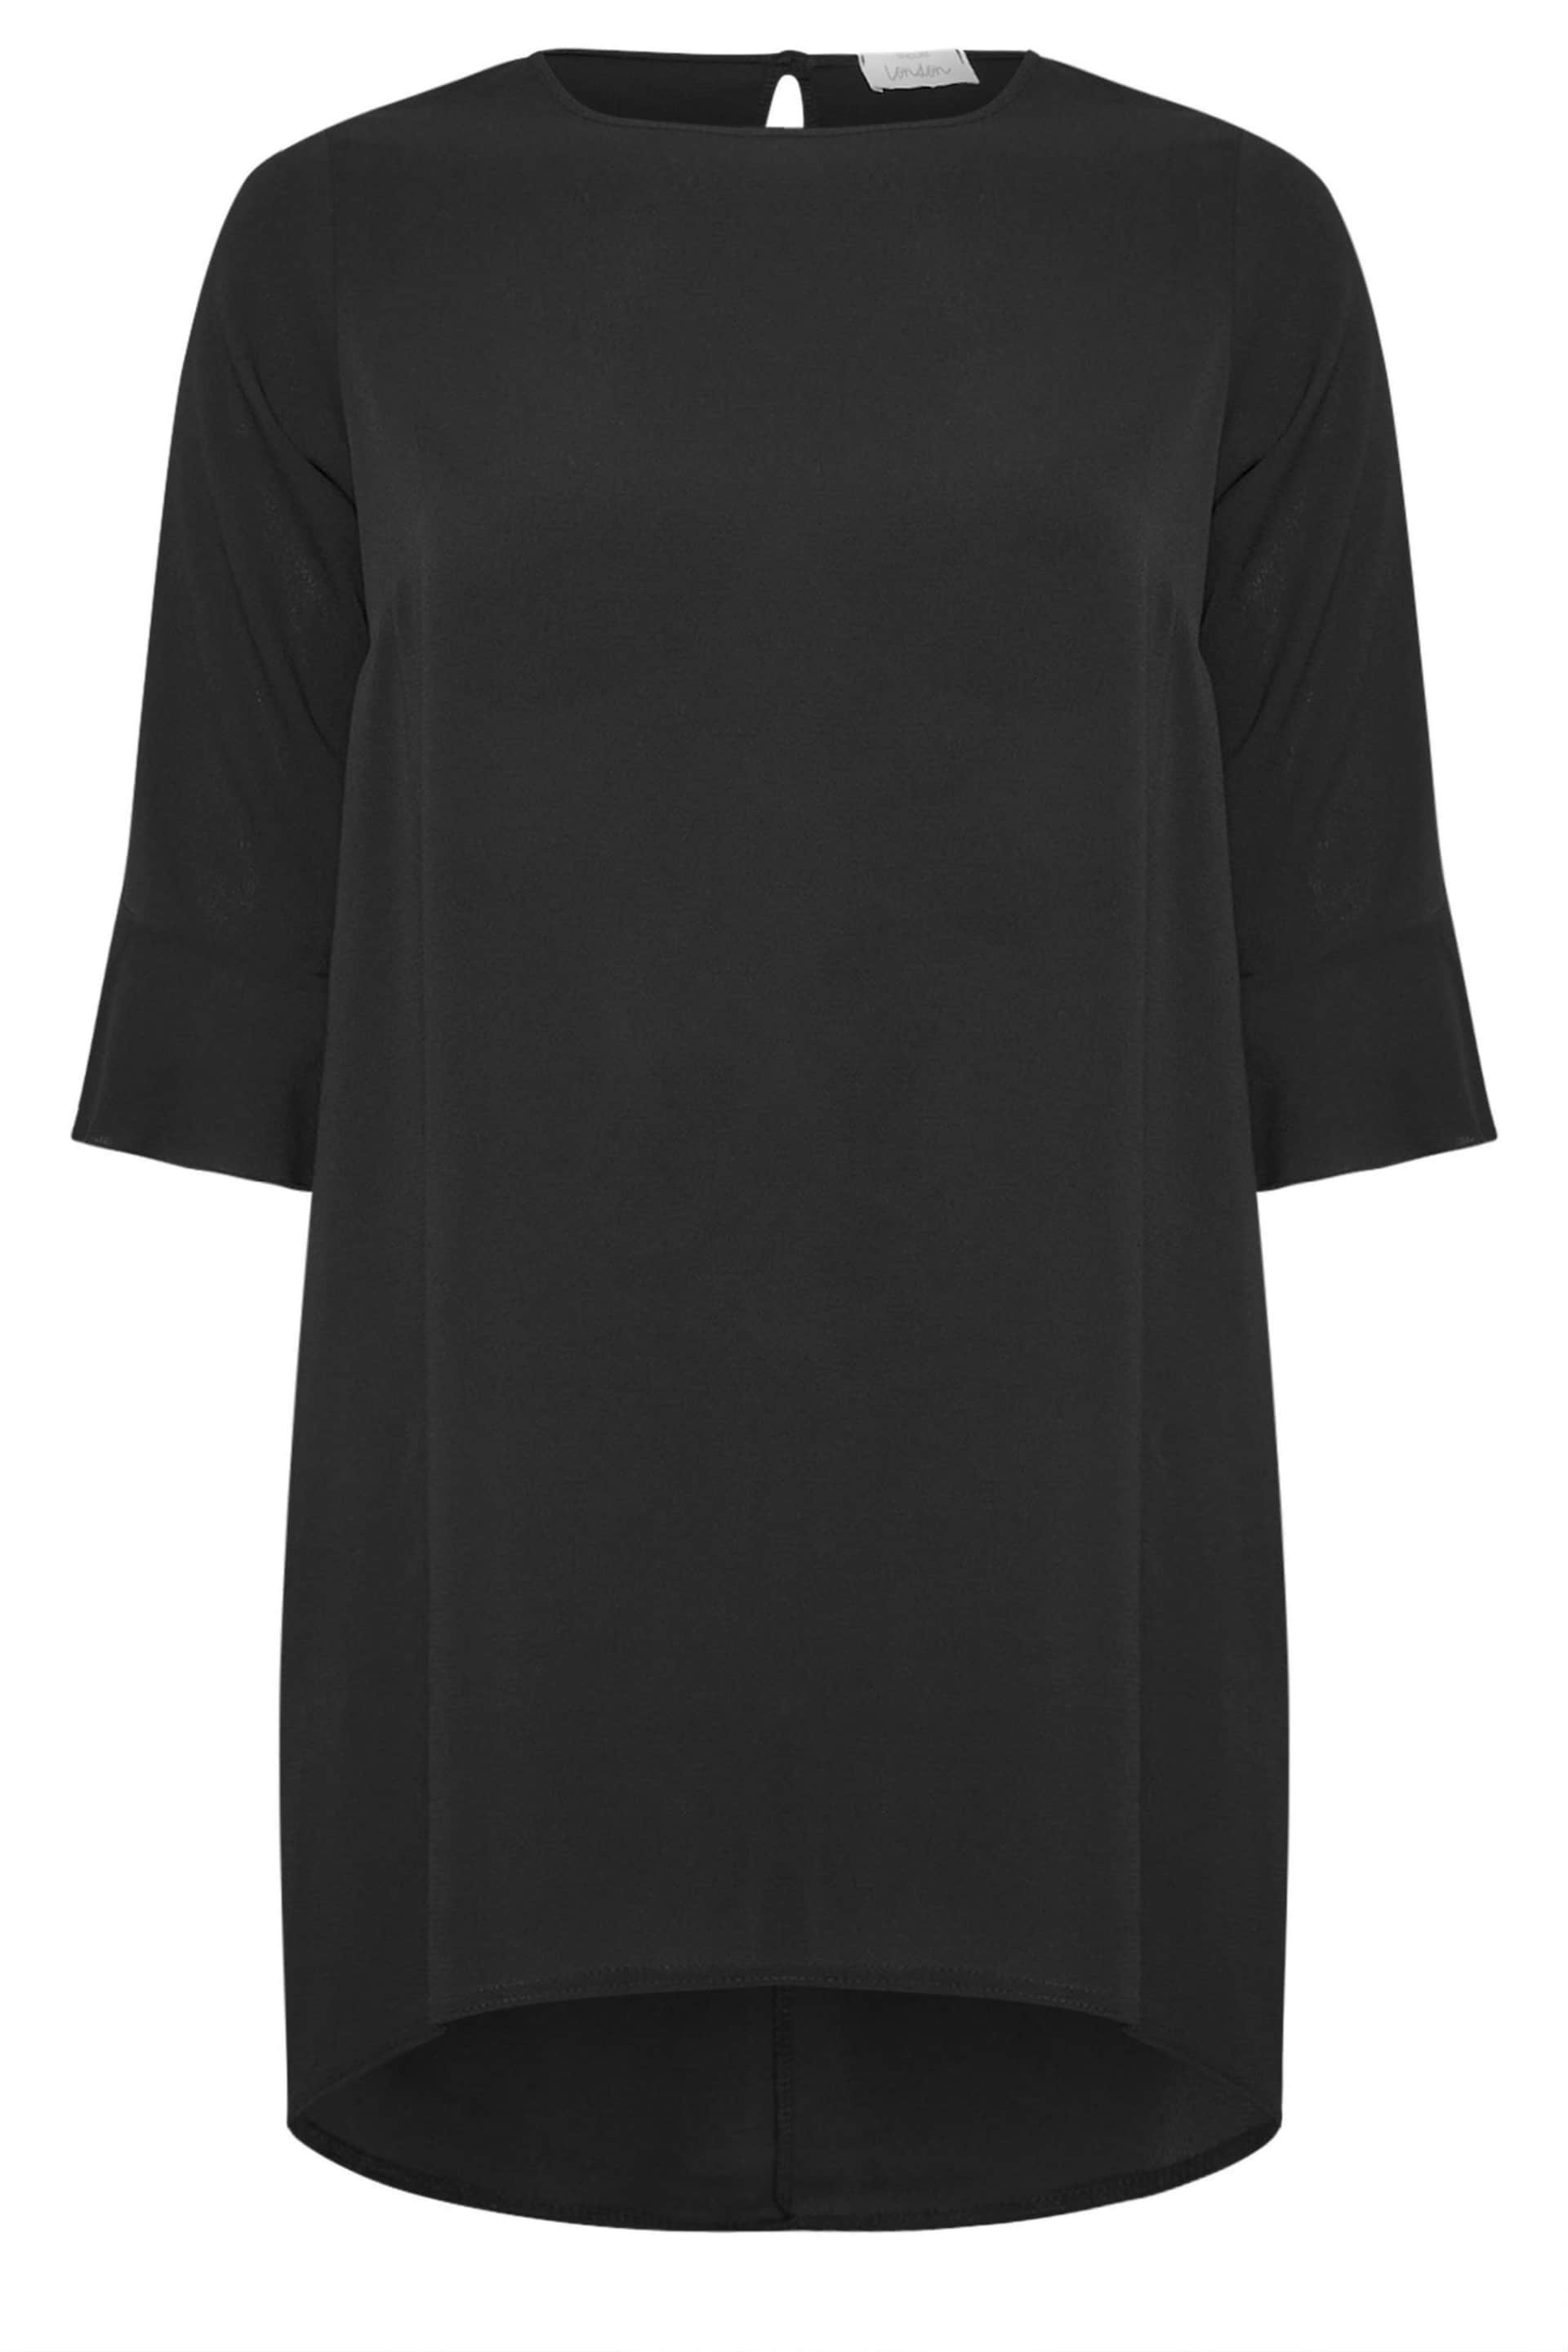 Yours Curve Black Flute Sleeve Tunic - Image 2 of 2